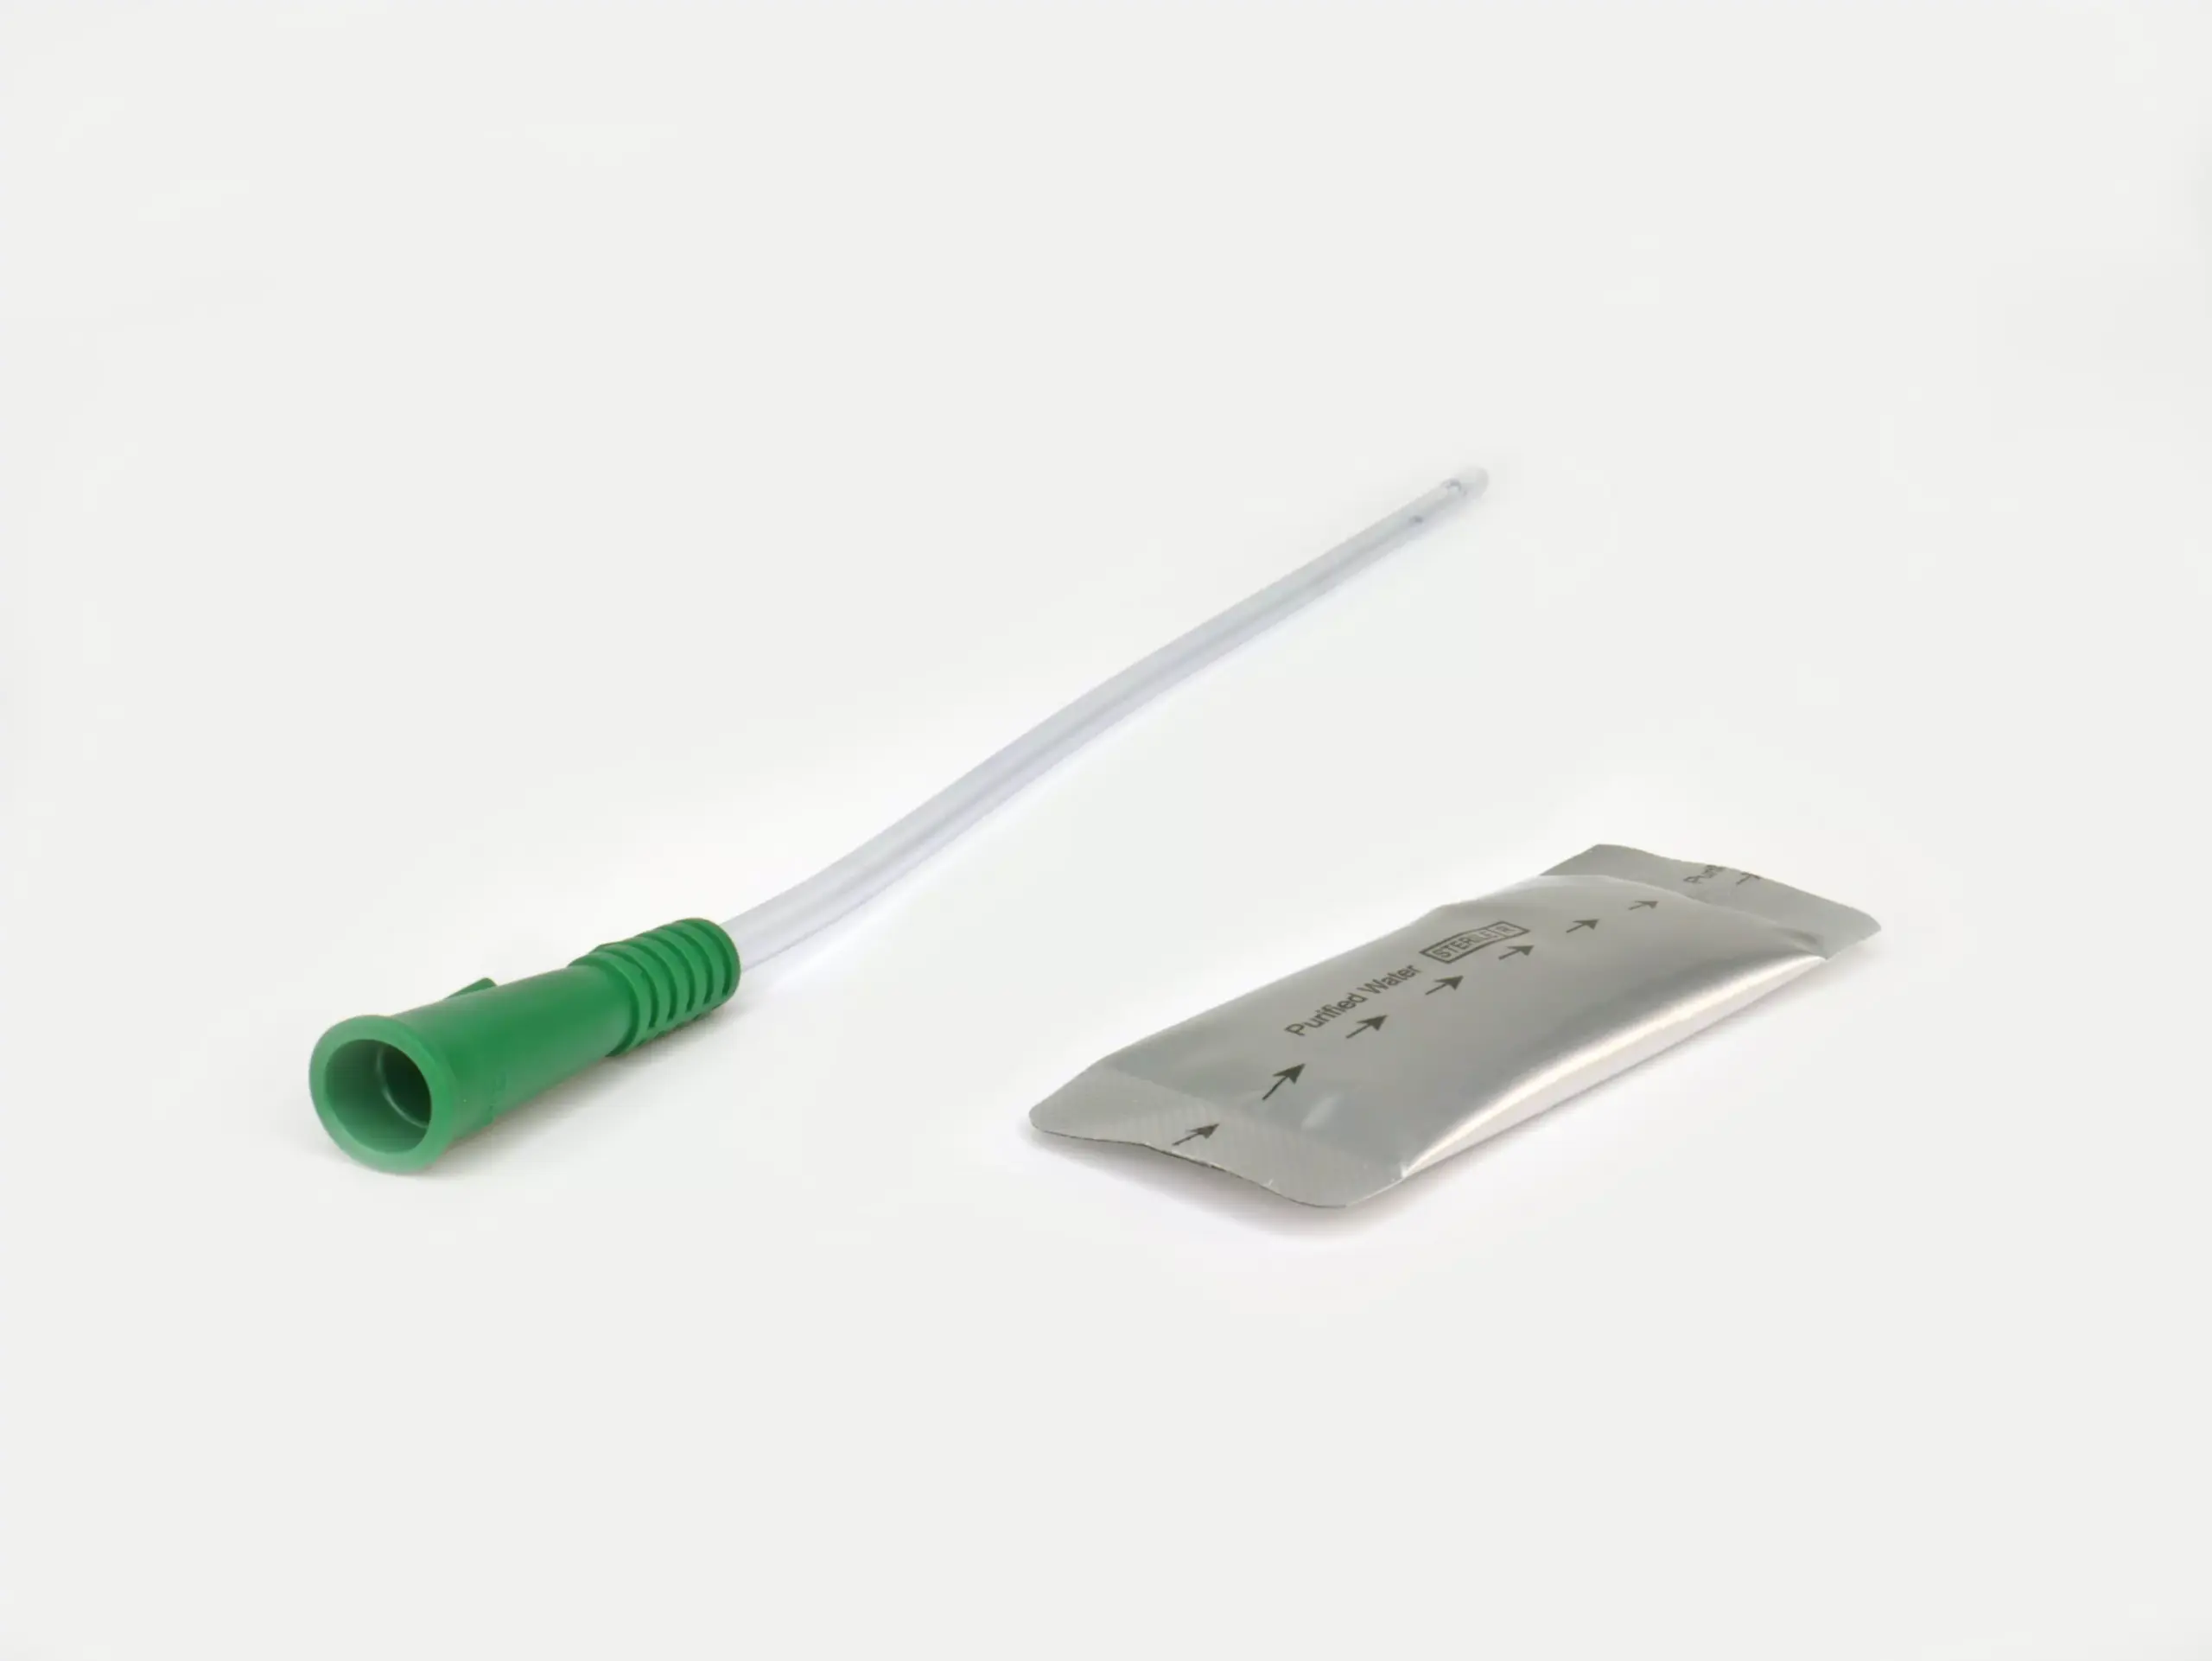 A close-up product photograph featuring one of RA Fischer Co.'s urological catheters from the Cure brand. The catheter is equipped with a green gripper and is positioned next to a silver water packet, emphasizing its key features.